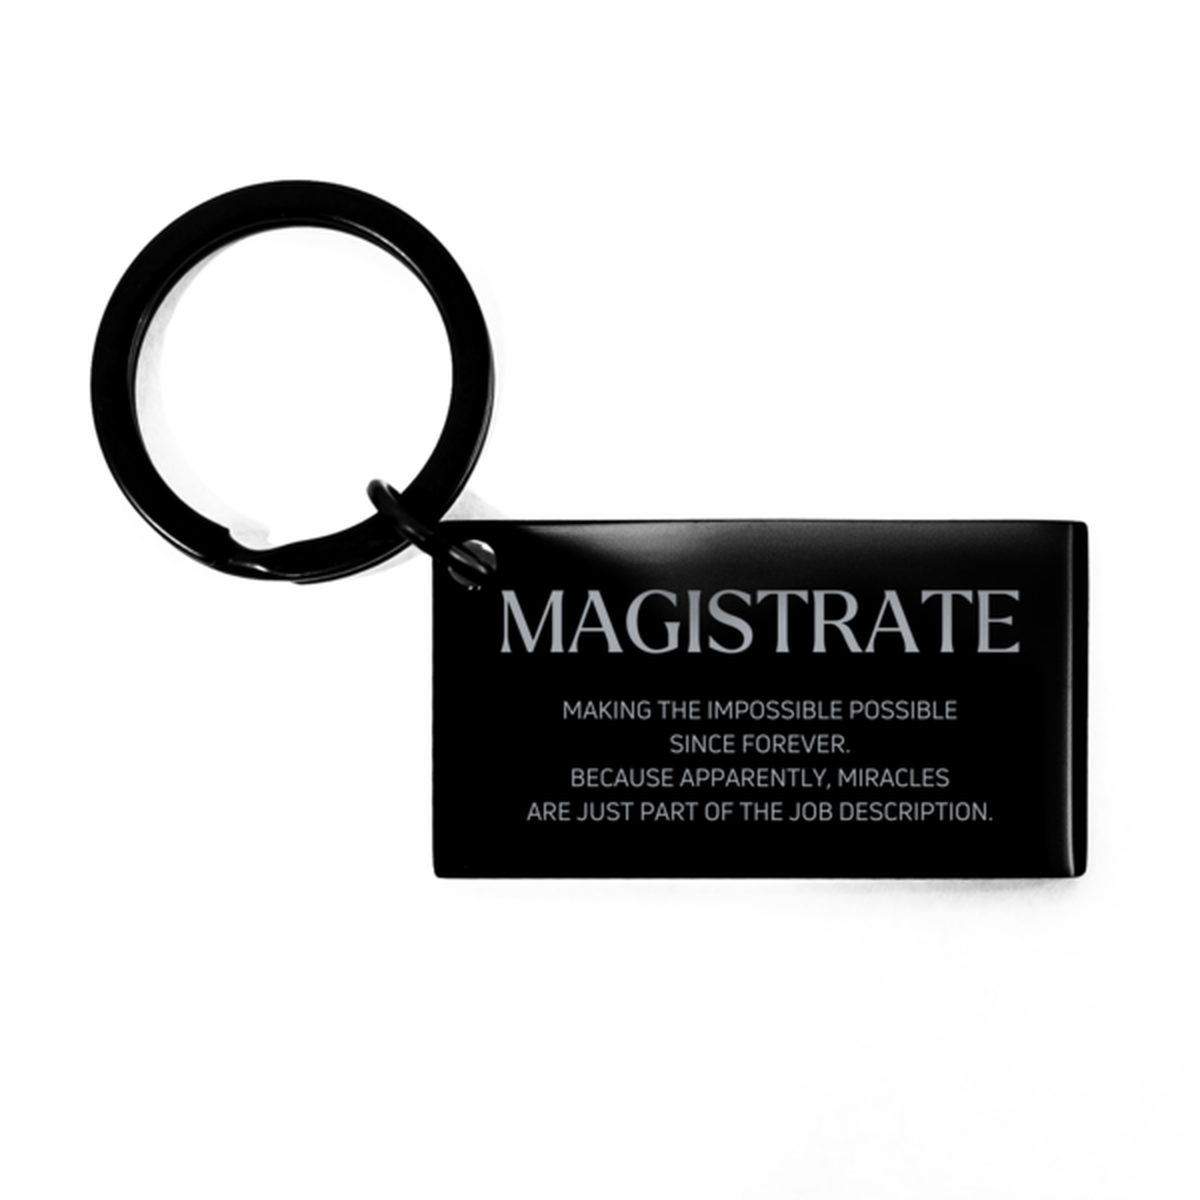 Funny Magistrate Gifts, Miracles are just part of the job description, Inspirational Birthday Keychain For Magistrate, Men, Women, Coworkers, Friends, Boss